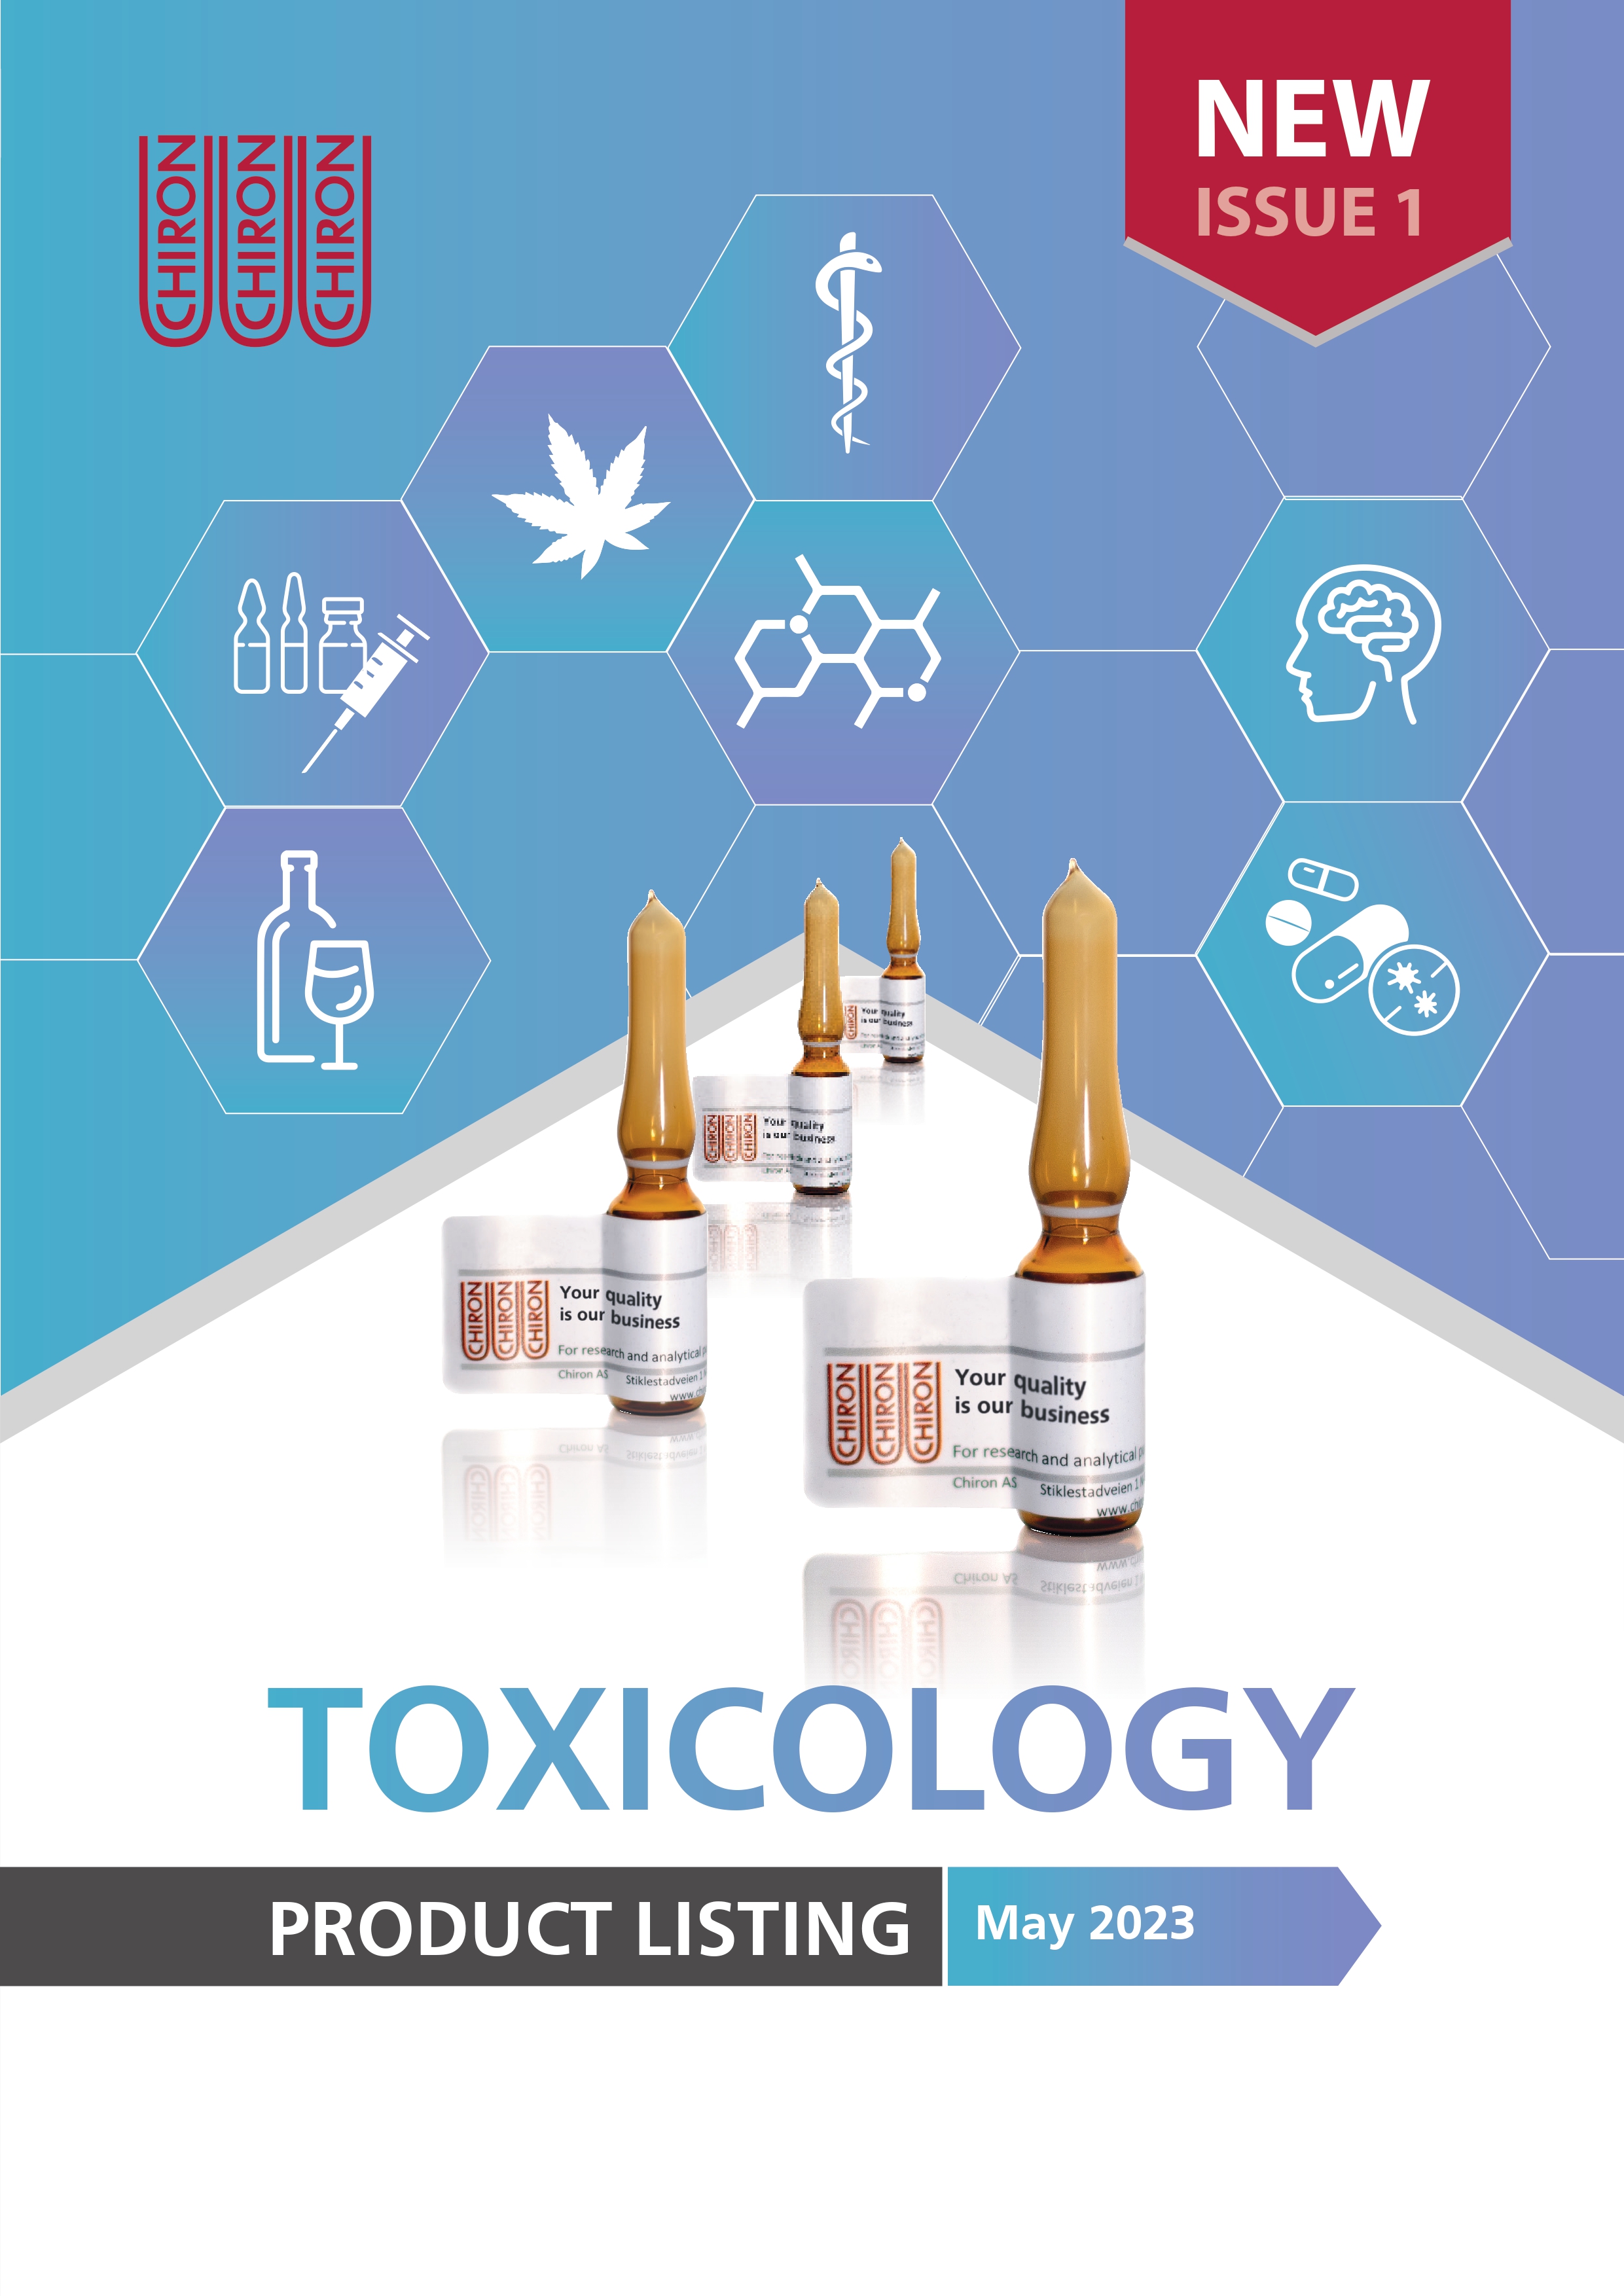 New Toxicology Product Issue 1 | May 2023